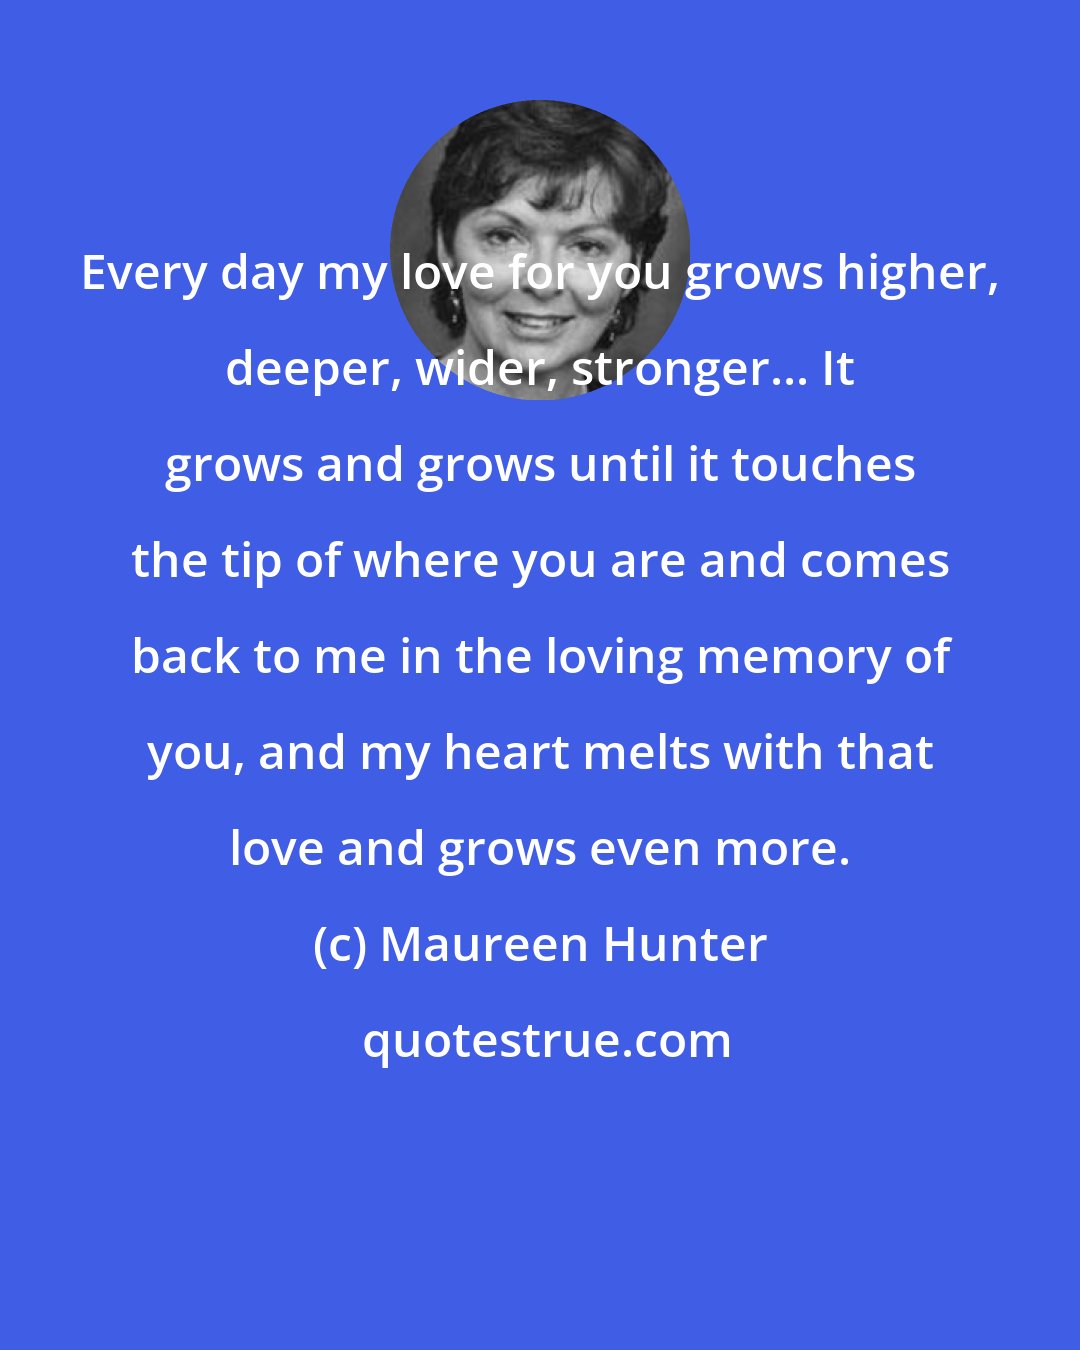 Maureen Hunter: Every day my love for you grows higher, deeper, wider, stronger... It grows and grows until it touches the tip of where you are and comes back to me in the loving memory of you, and my heart melts with that love and grows even more.